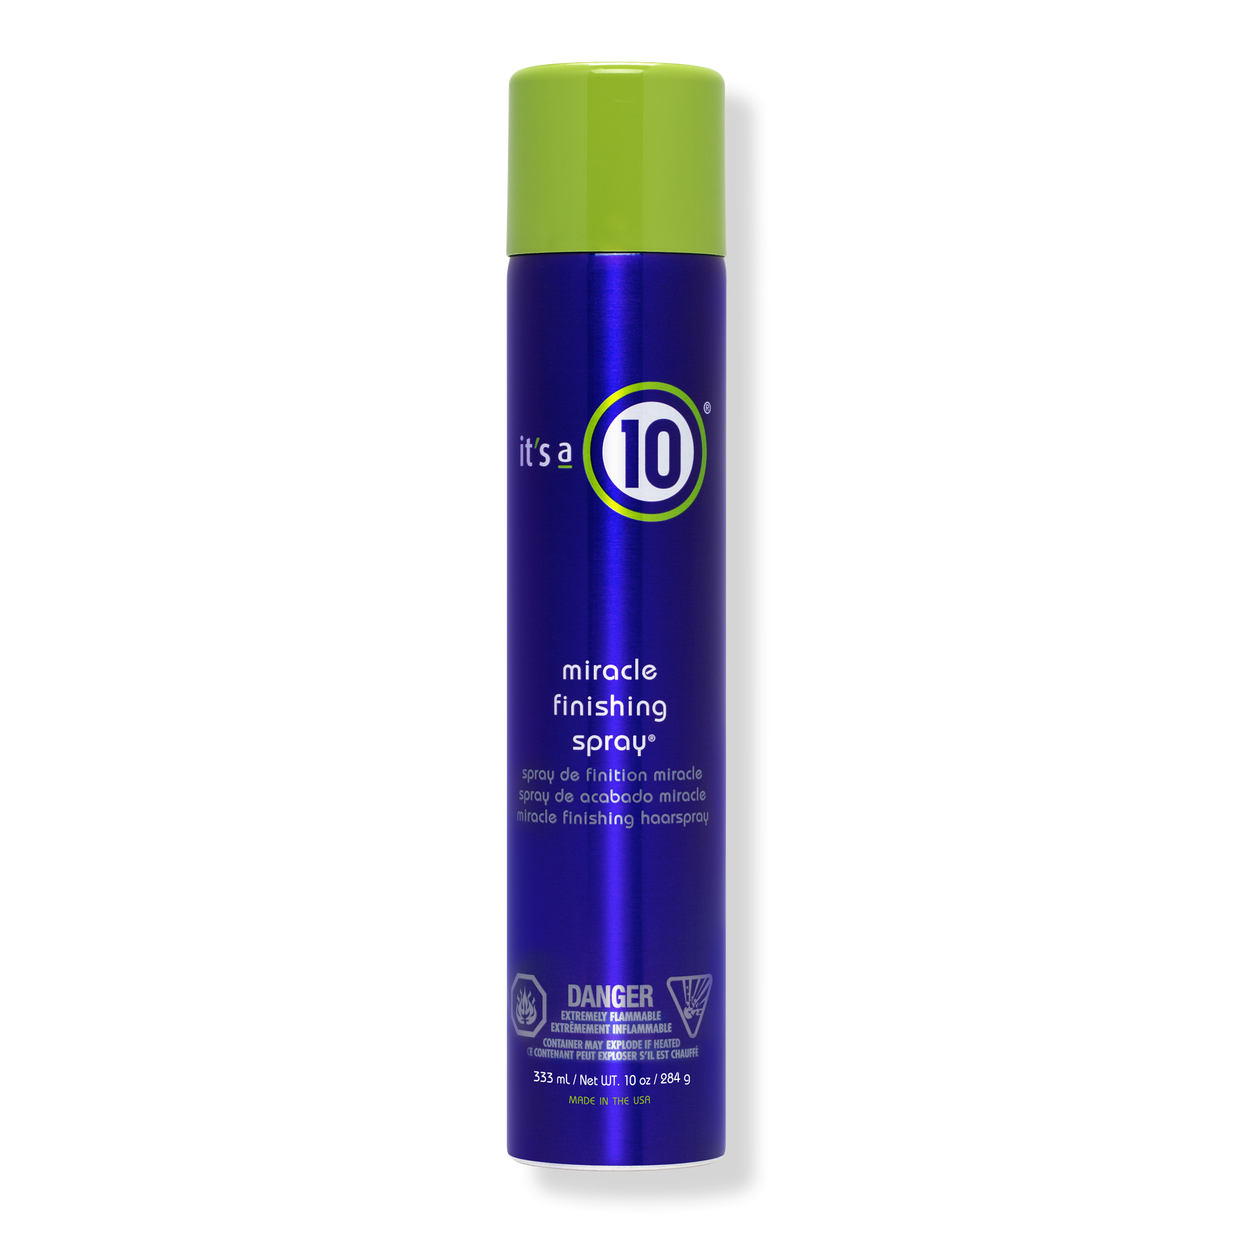 Miracle Finishing Spray With 10 Benefits - It's A 10